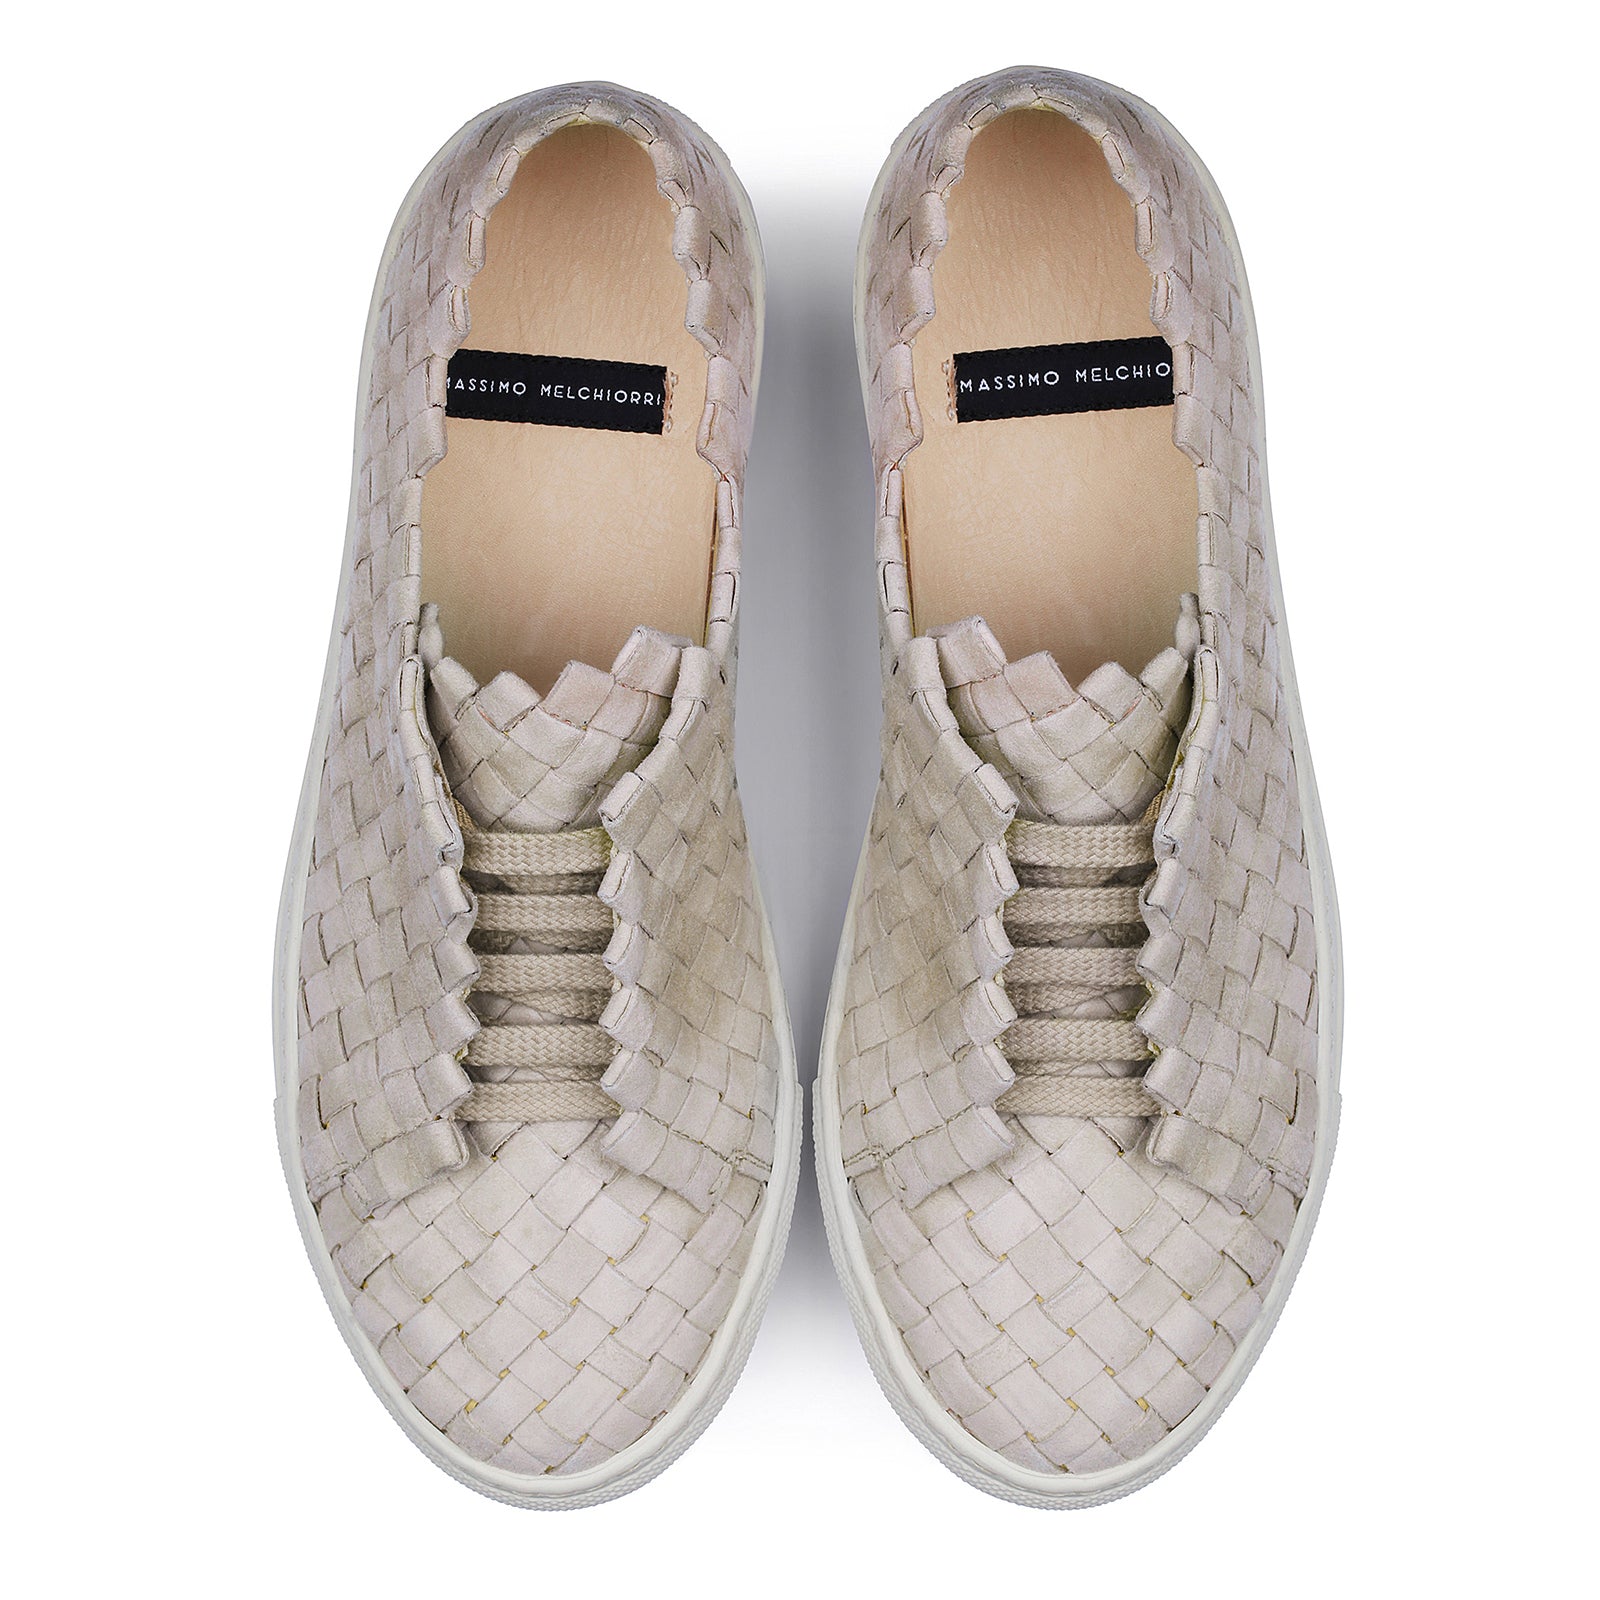 The Woven Sneaker Suede, Woven Sneakers Womens - MILANER